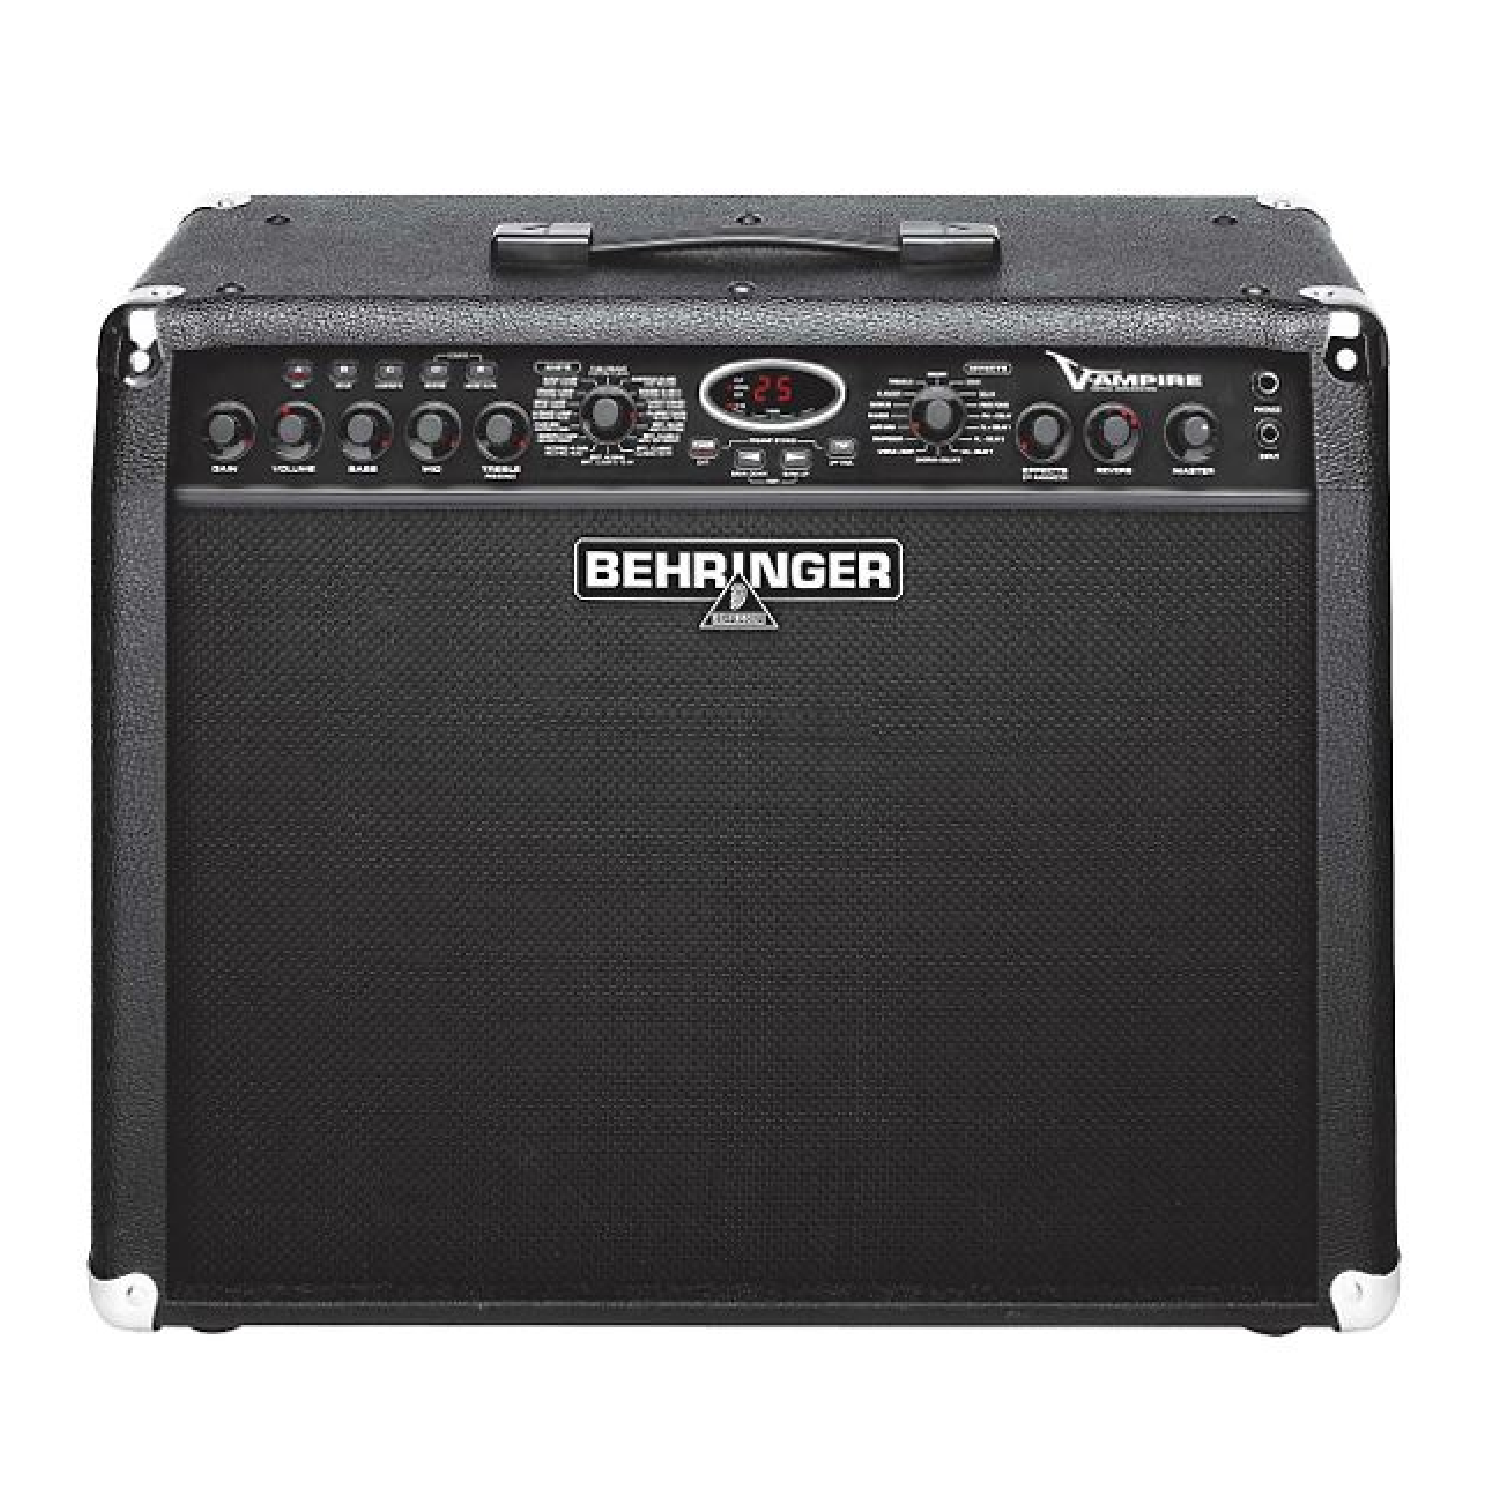 V- AMPIRE 15 Inch 2 x 50 Watts Stereo or 100 Watts Mono Operation 32 Authentic Virtual Amps, 16 Multi Effects LX 112 behringer